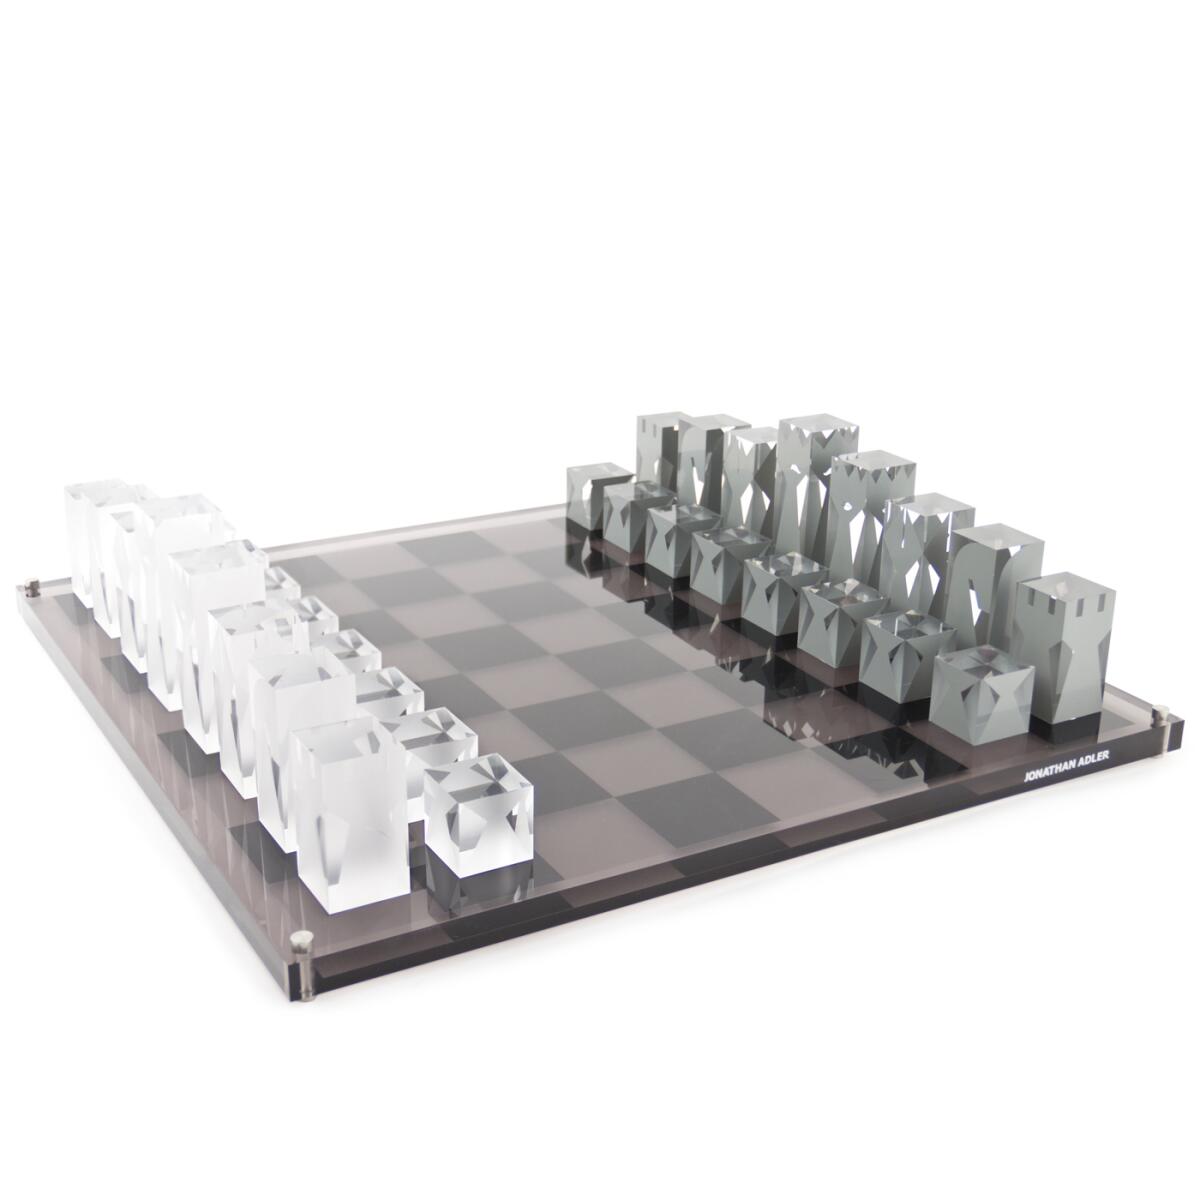 A photo of an acrylic chess set from Jonathan Adler.